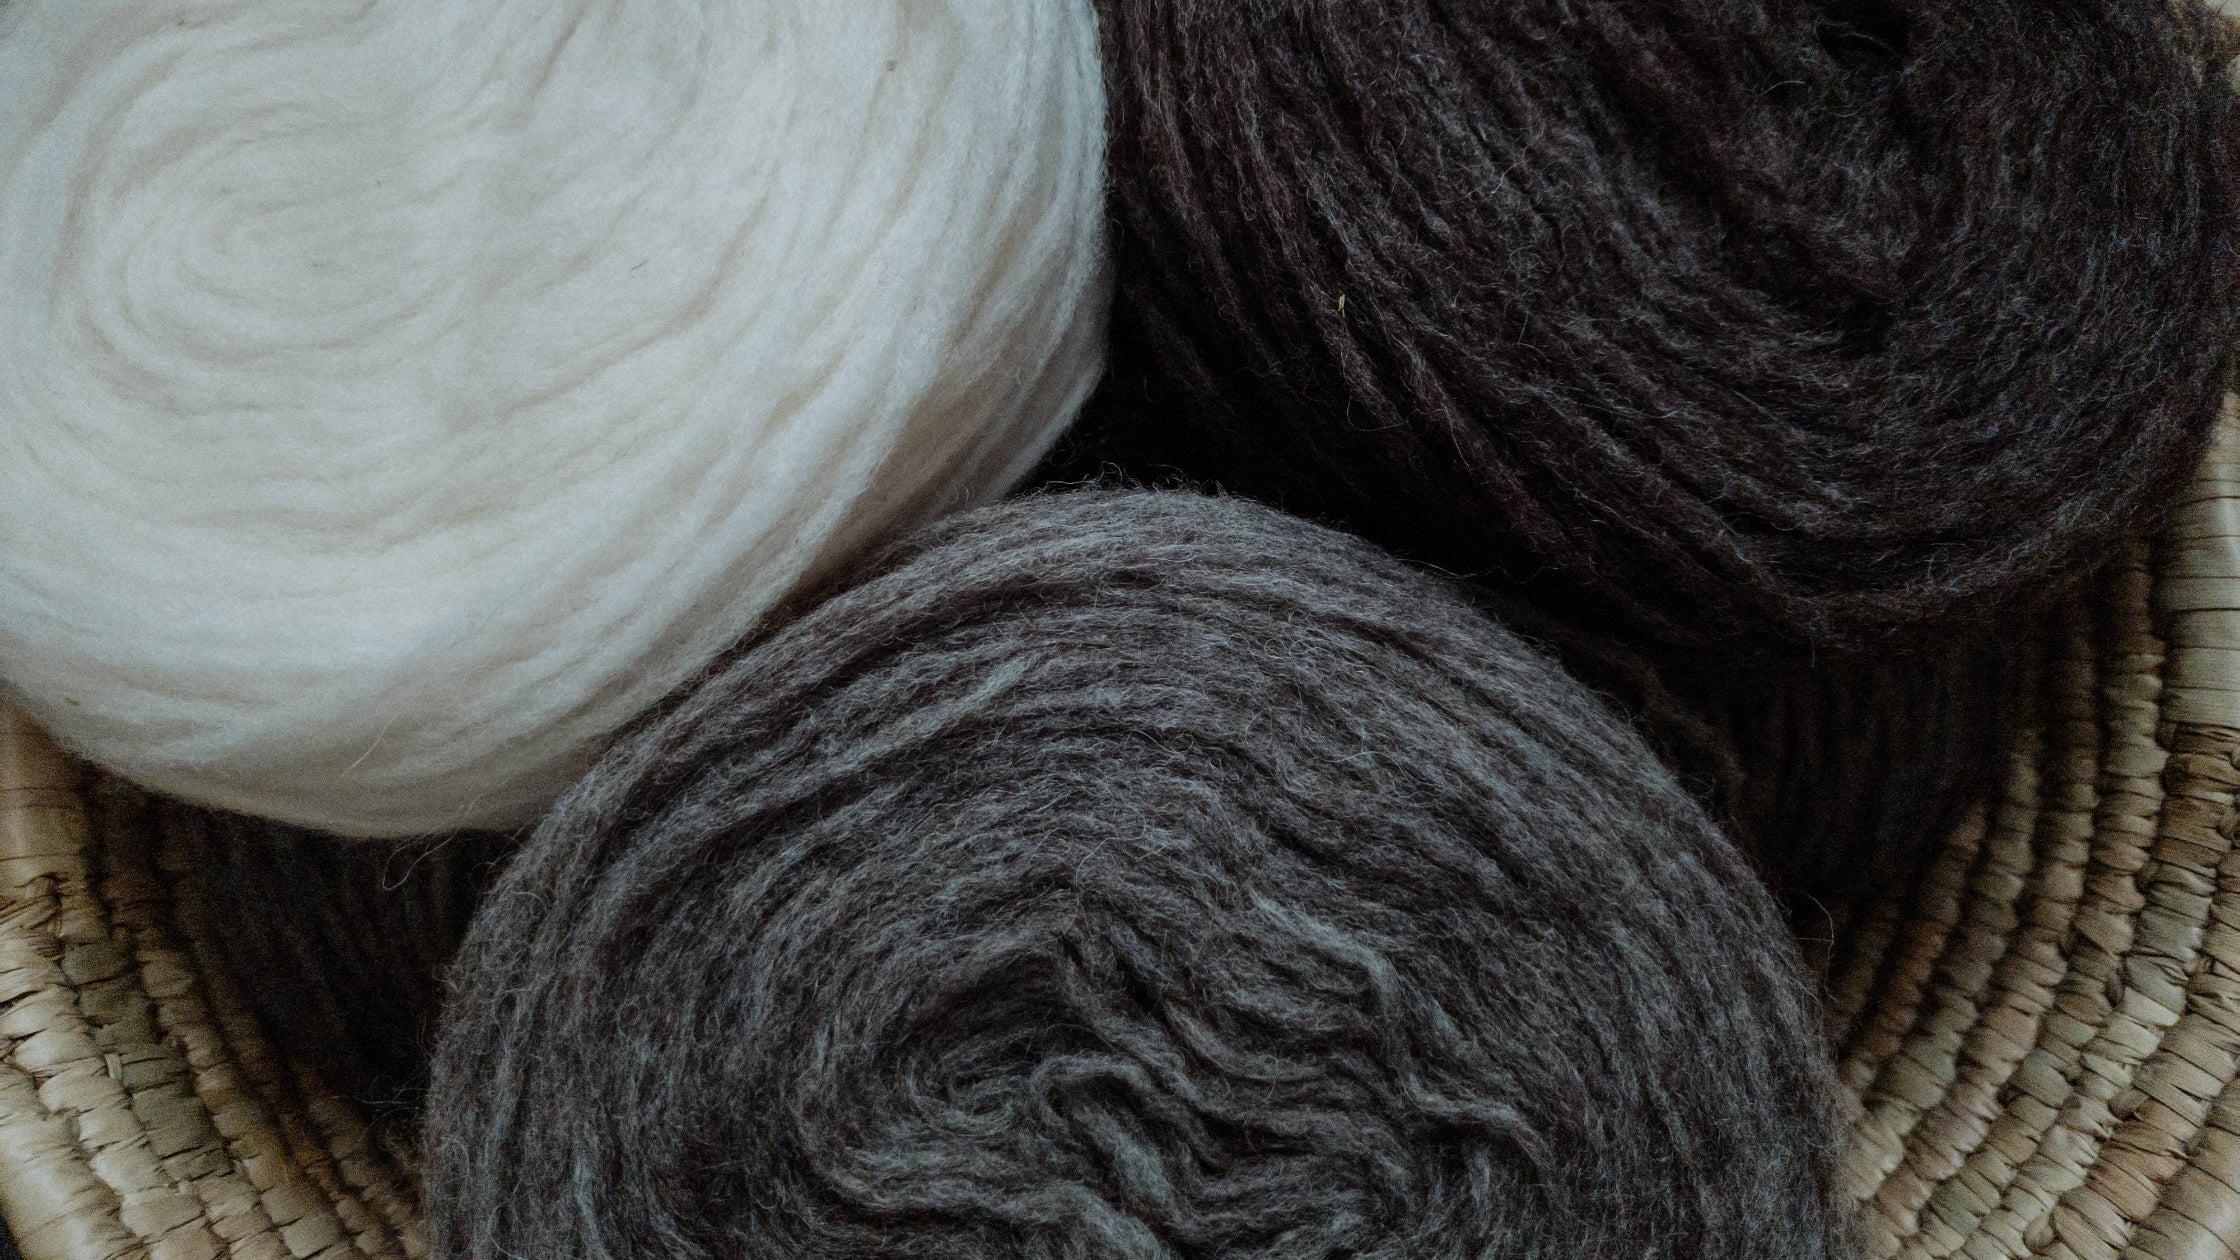 Choosing Yarn, Introduction and Weight